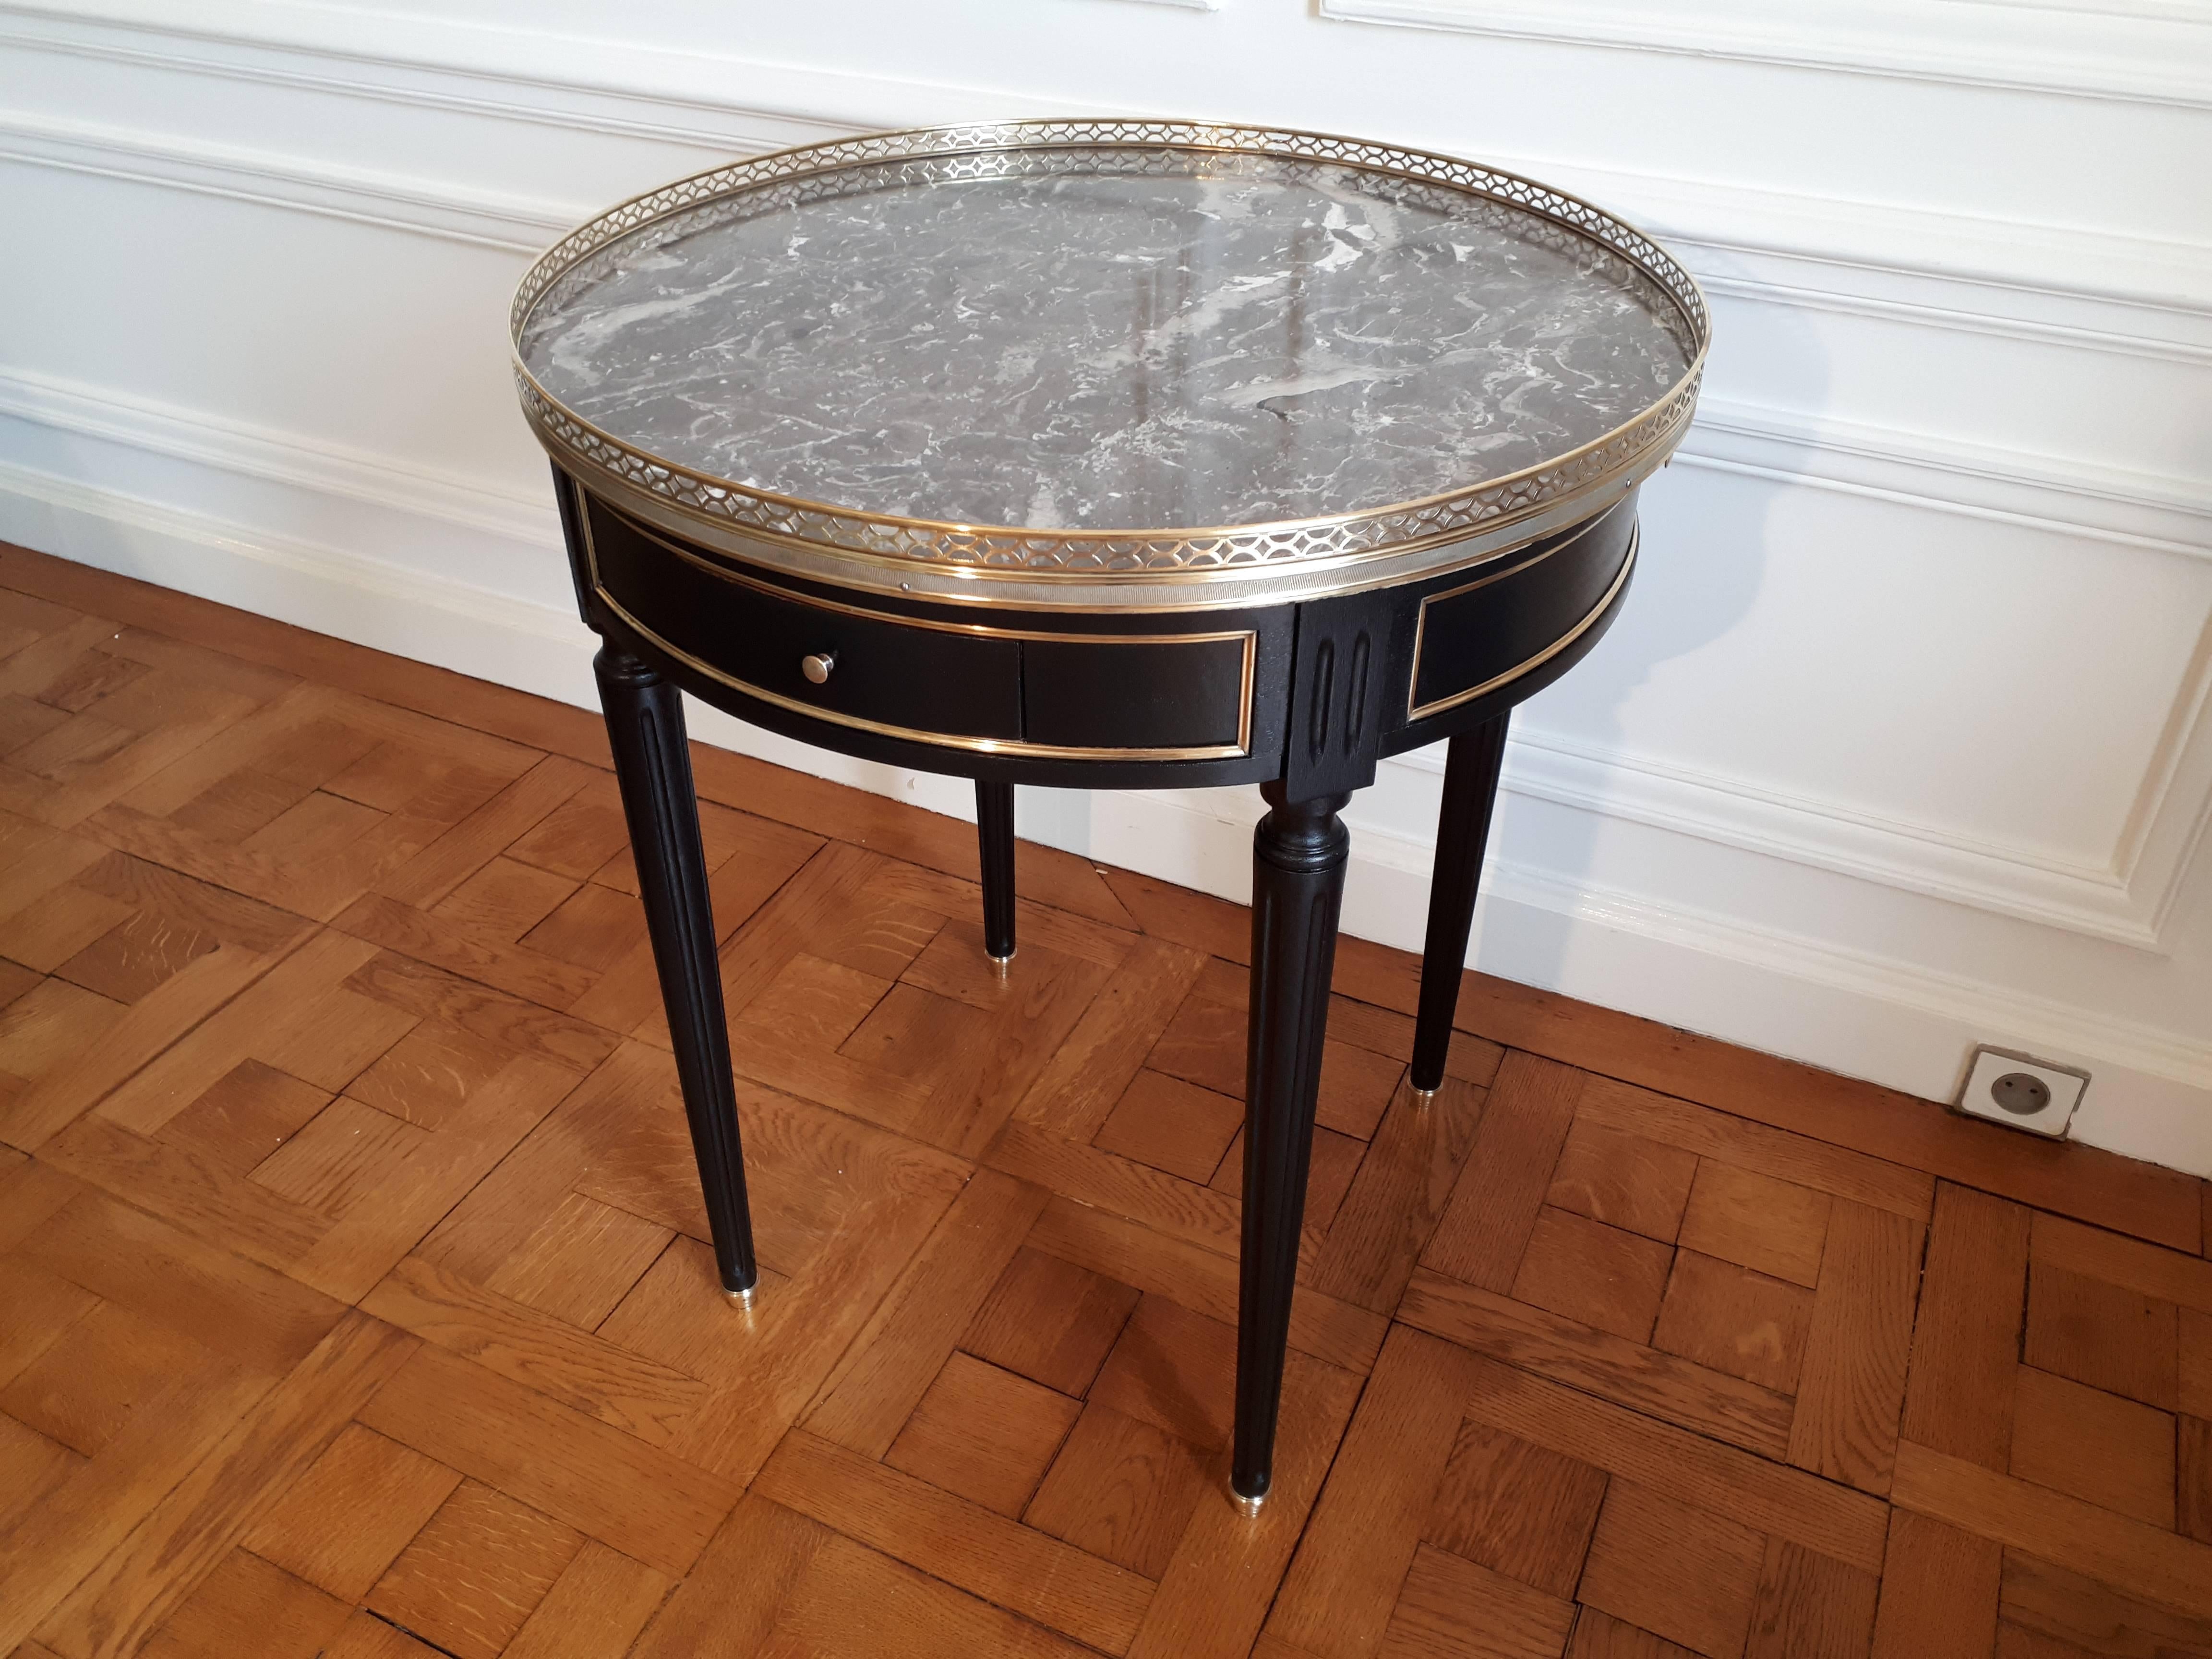 French Louis XVI style bouillotte table with a grey marble-top.
Brass gallery and fluted legs finished with golden bronze clogs.
The whole belt is also decorated with golden brass.
The table has two dove-tailed drawers and two pull-out tablet